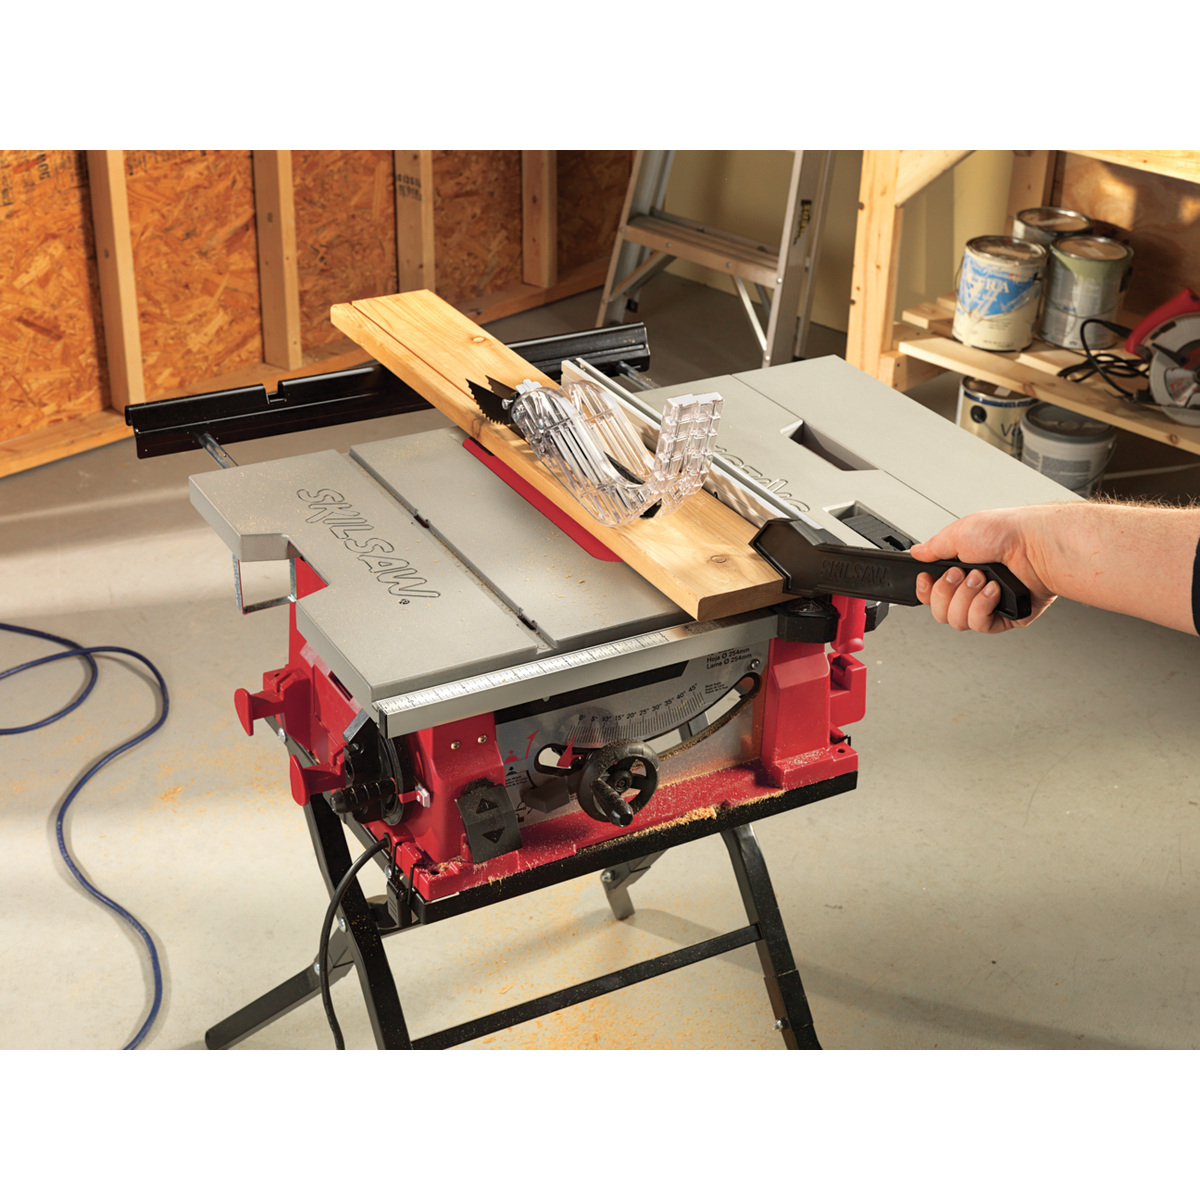 Stationary & Bench Top Power Tools